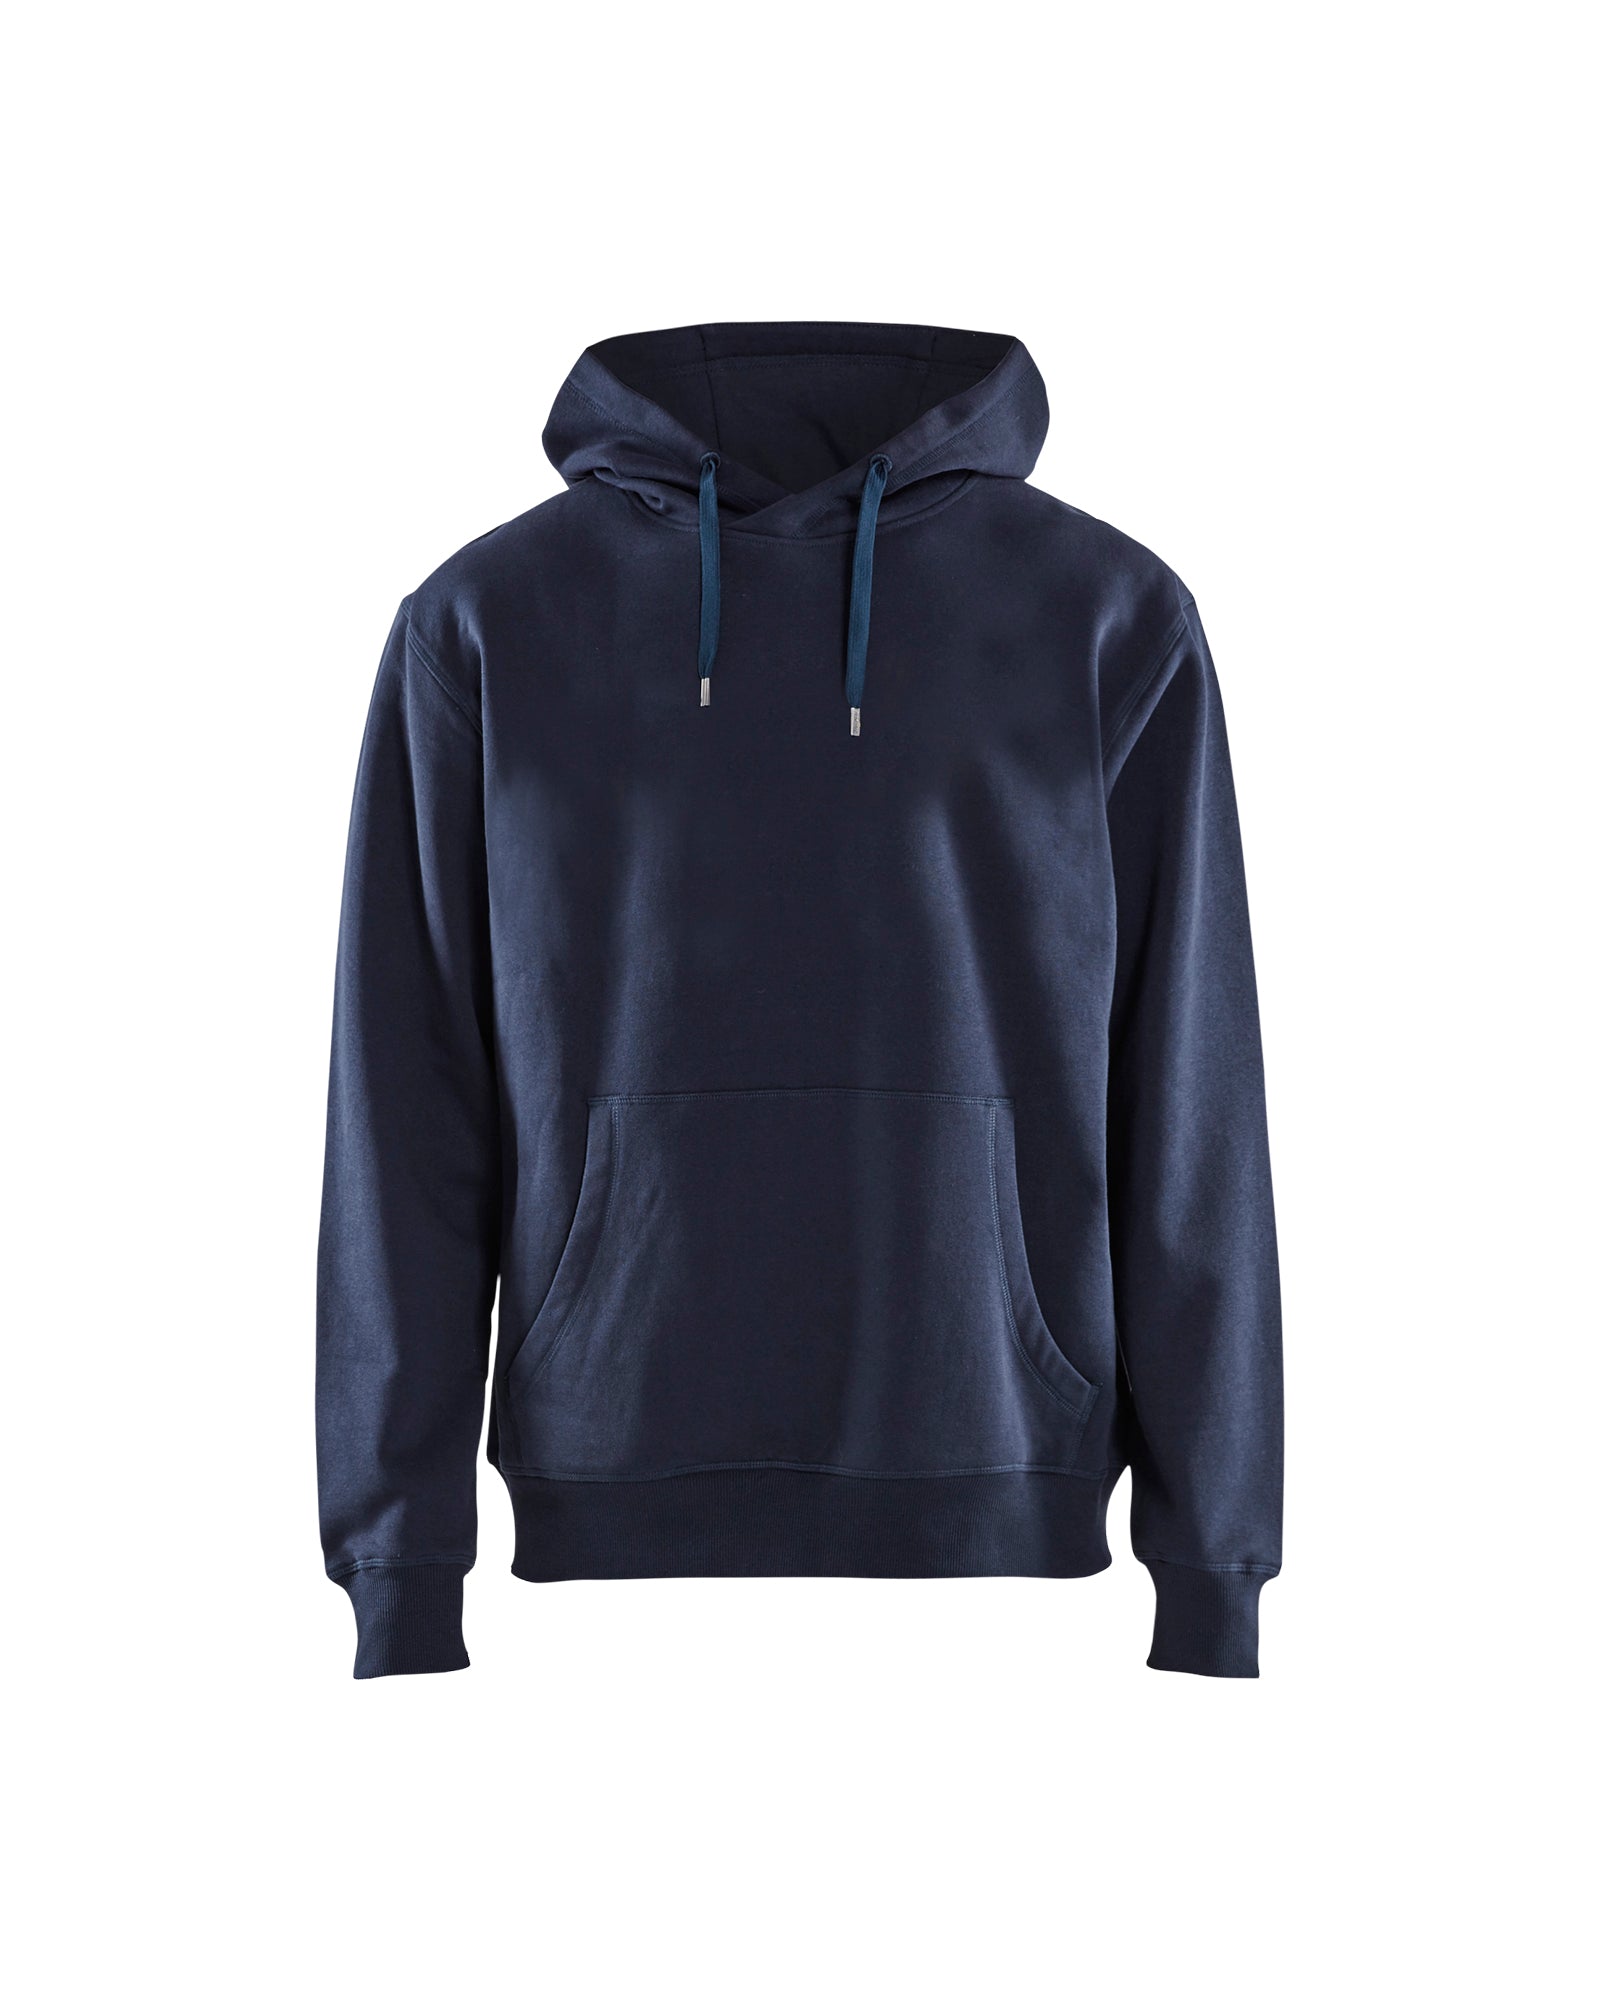 Men's Blaklader Hooded Sweatshirt in Navy Blue Profile from the front